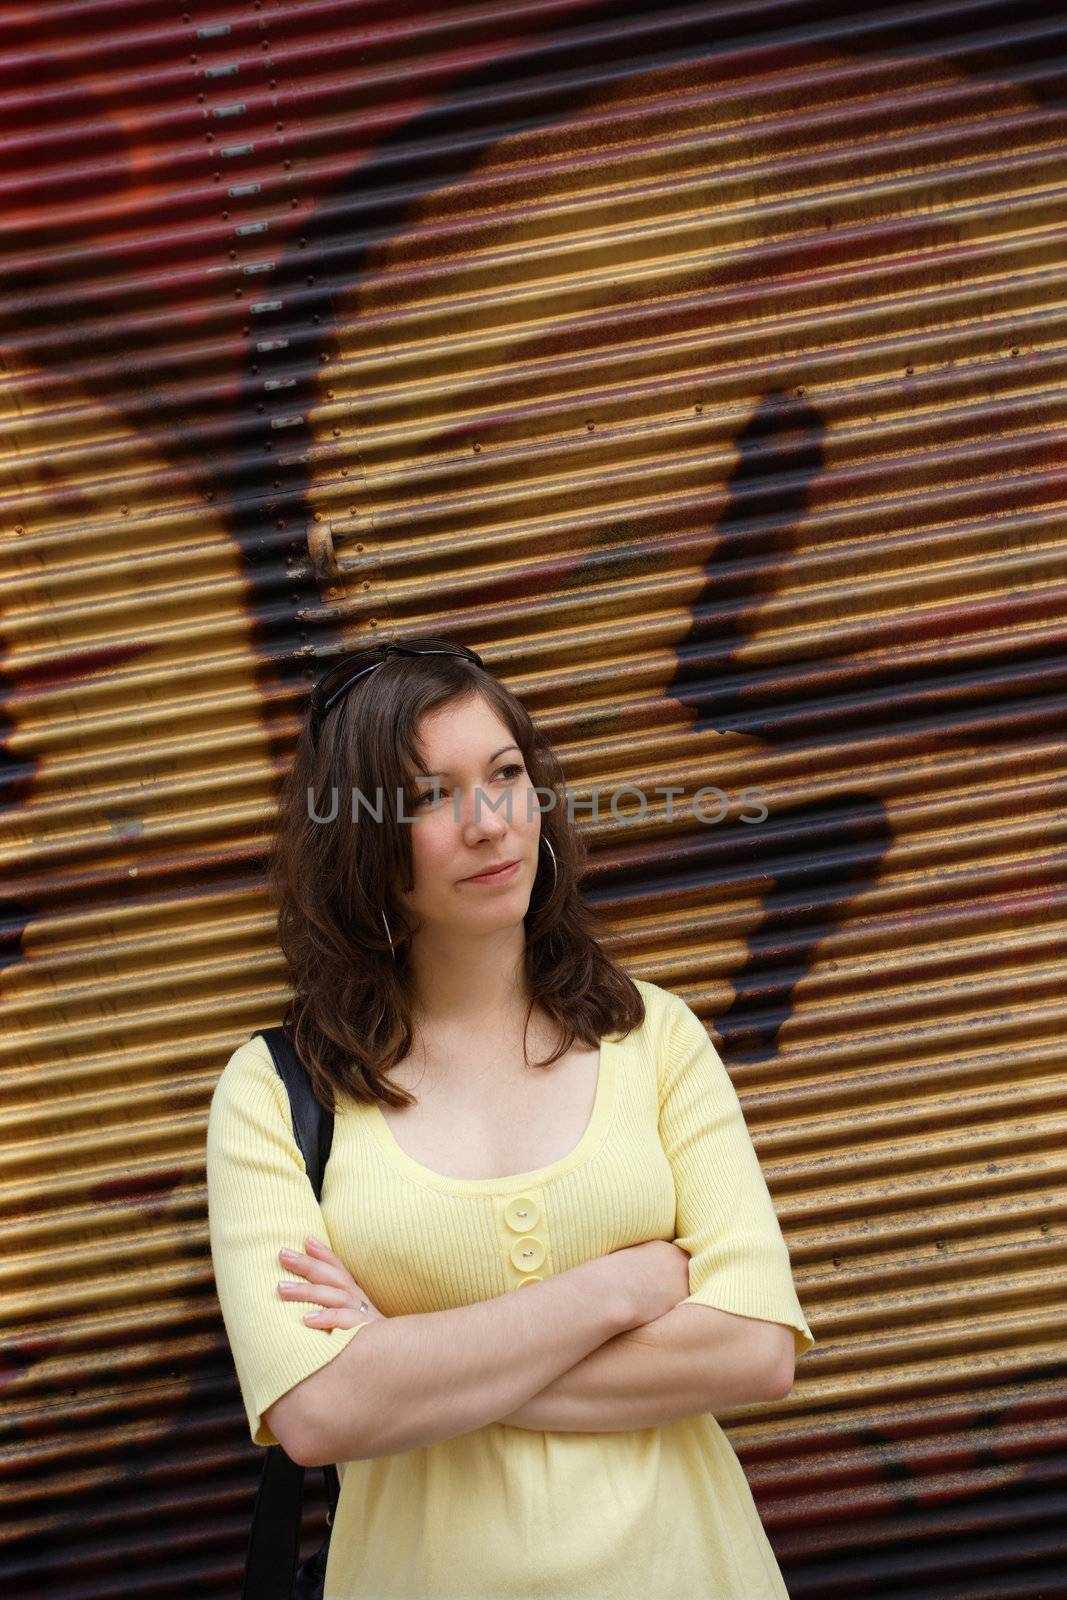 Beautiful woman standing in front of a metal pull-down door which is full of illegal graffiti.
